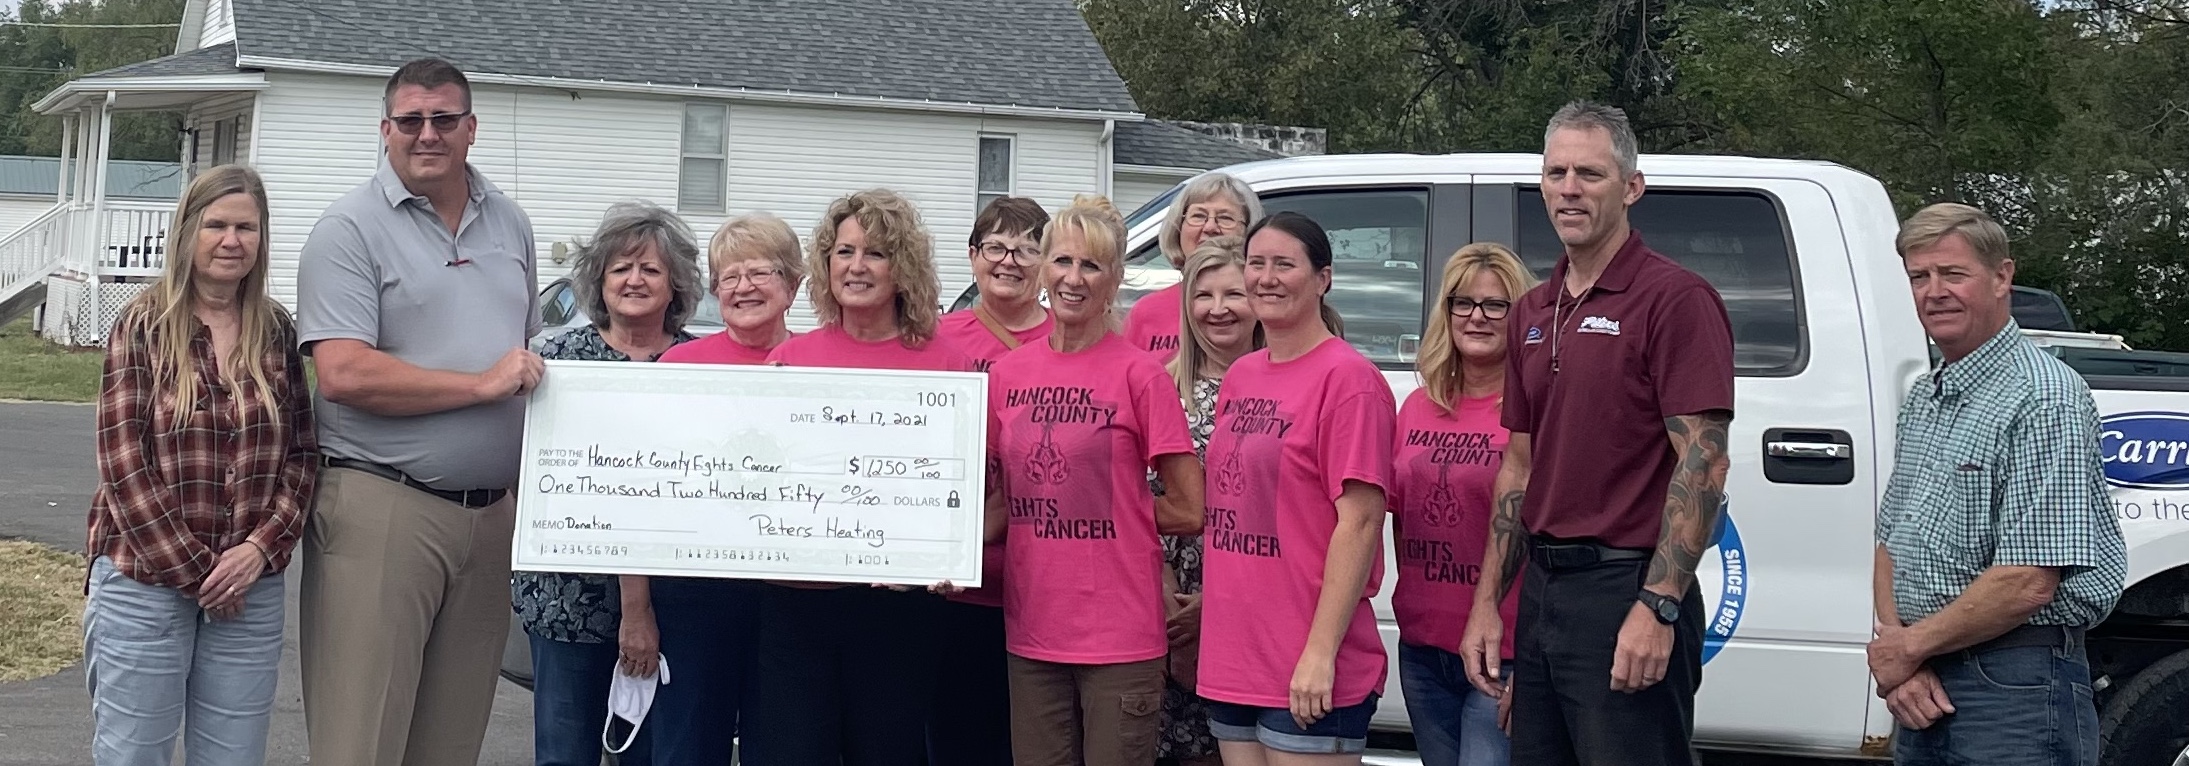 Hancock County Fights Cancer